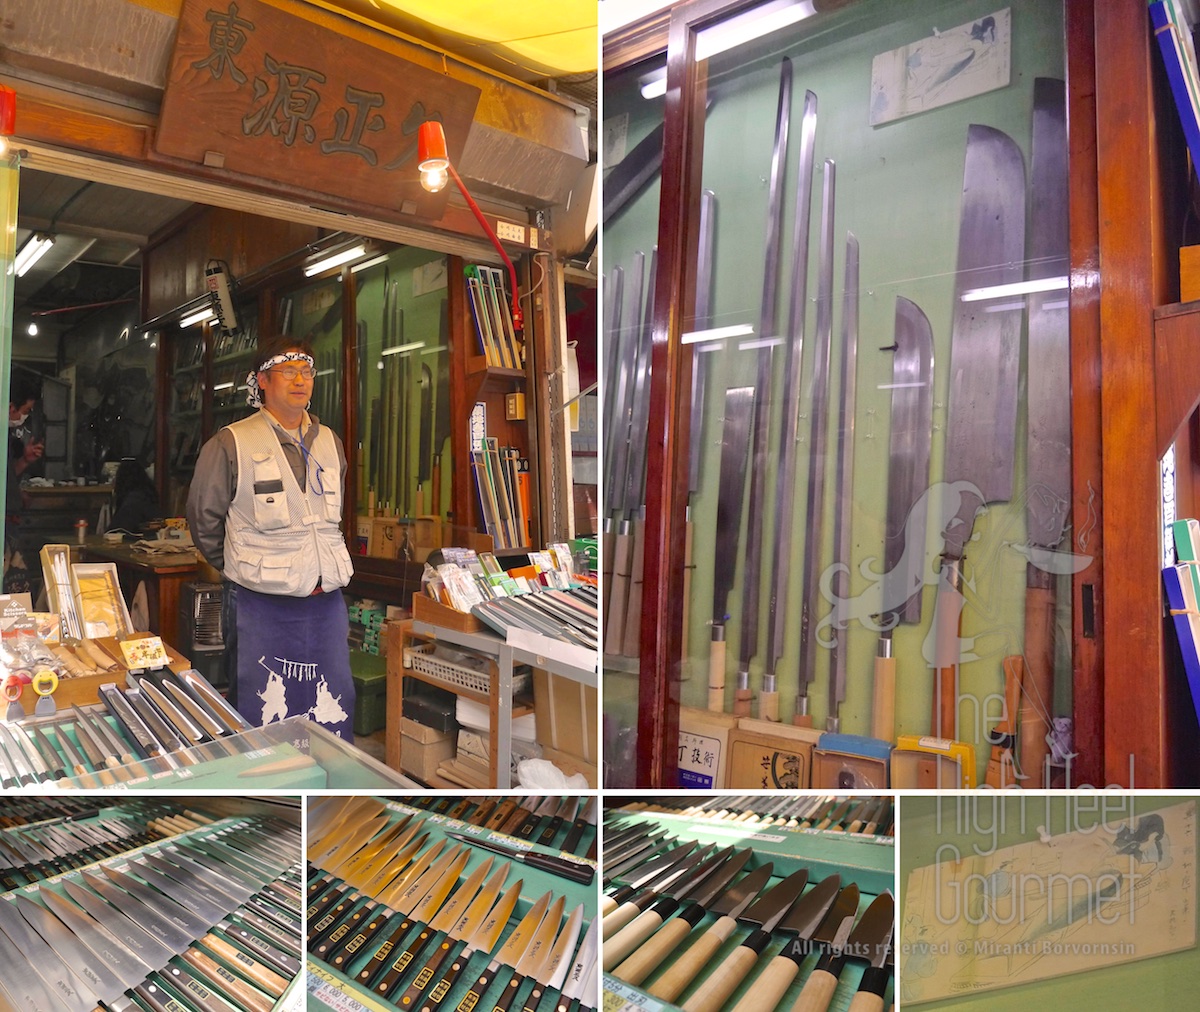 This is one of many knife shops at Tsukiji market. in the picture showed the "Tuna knifes", a set of very long knifes at least about 4.5-5 feet long, in the cabinet and the small picture on the bottom left showed how to use them.